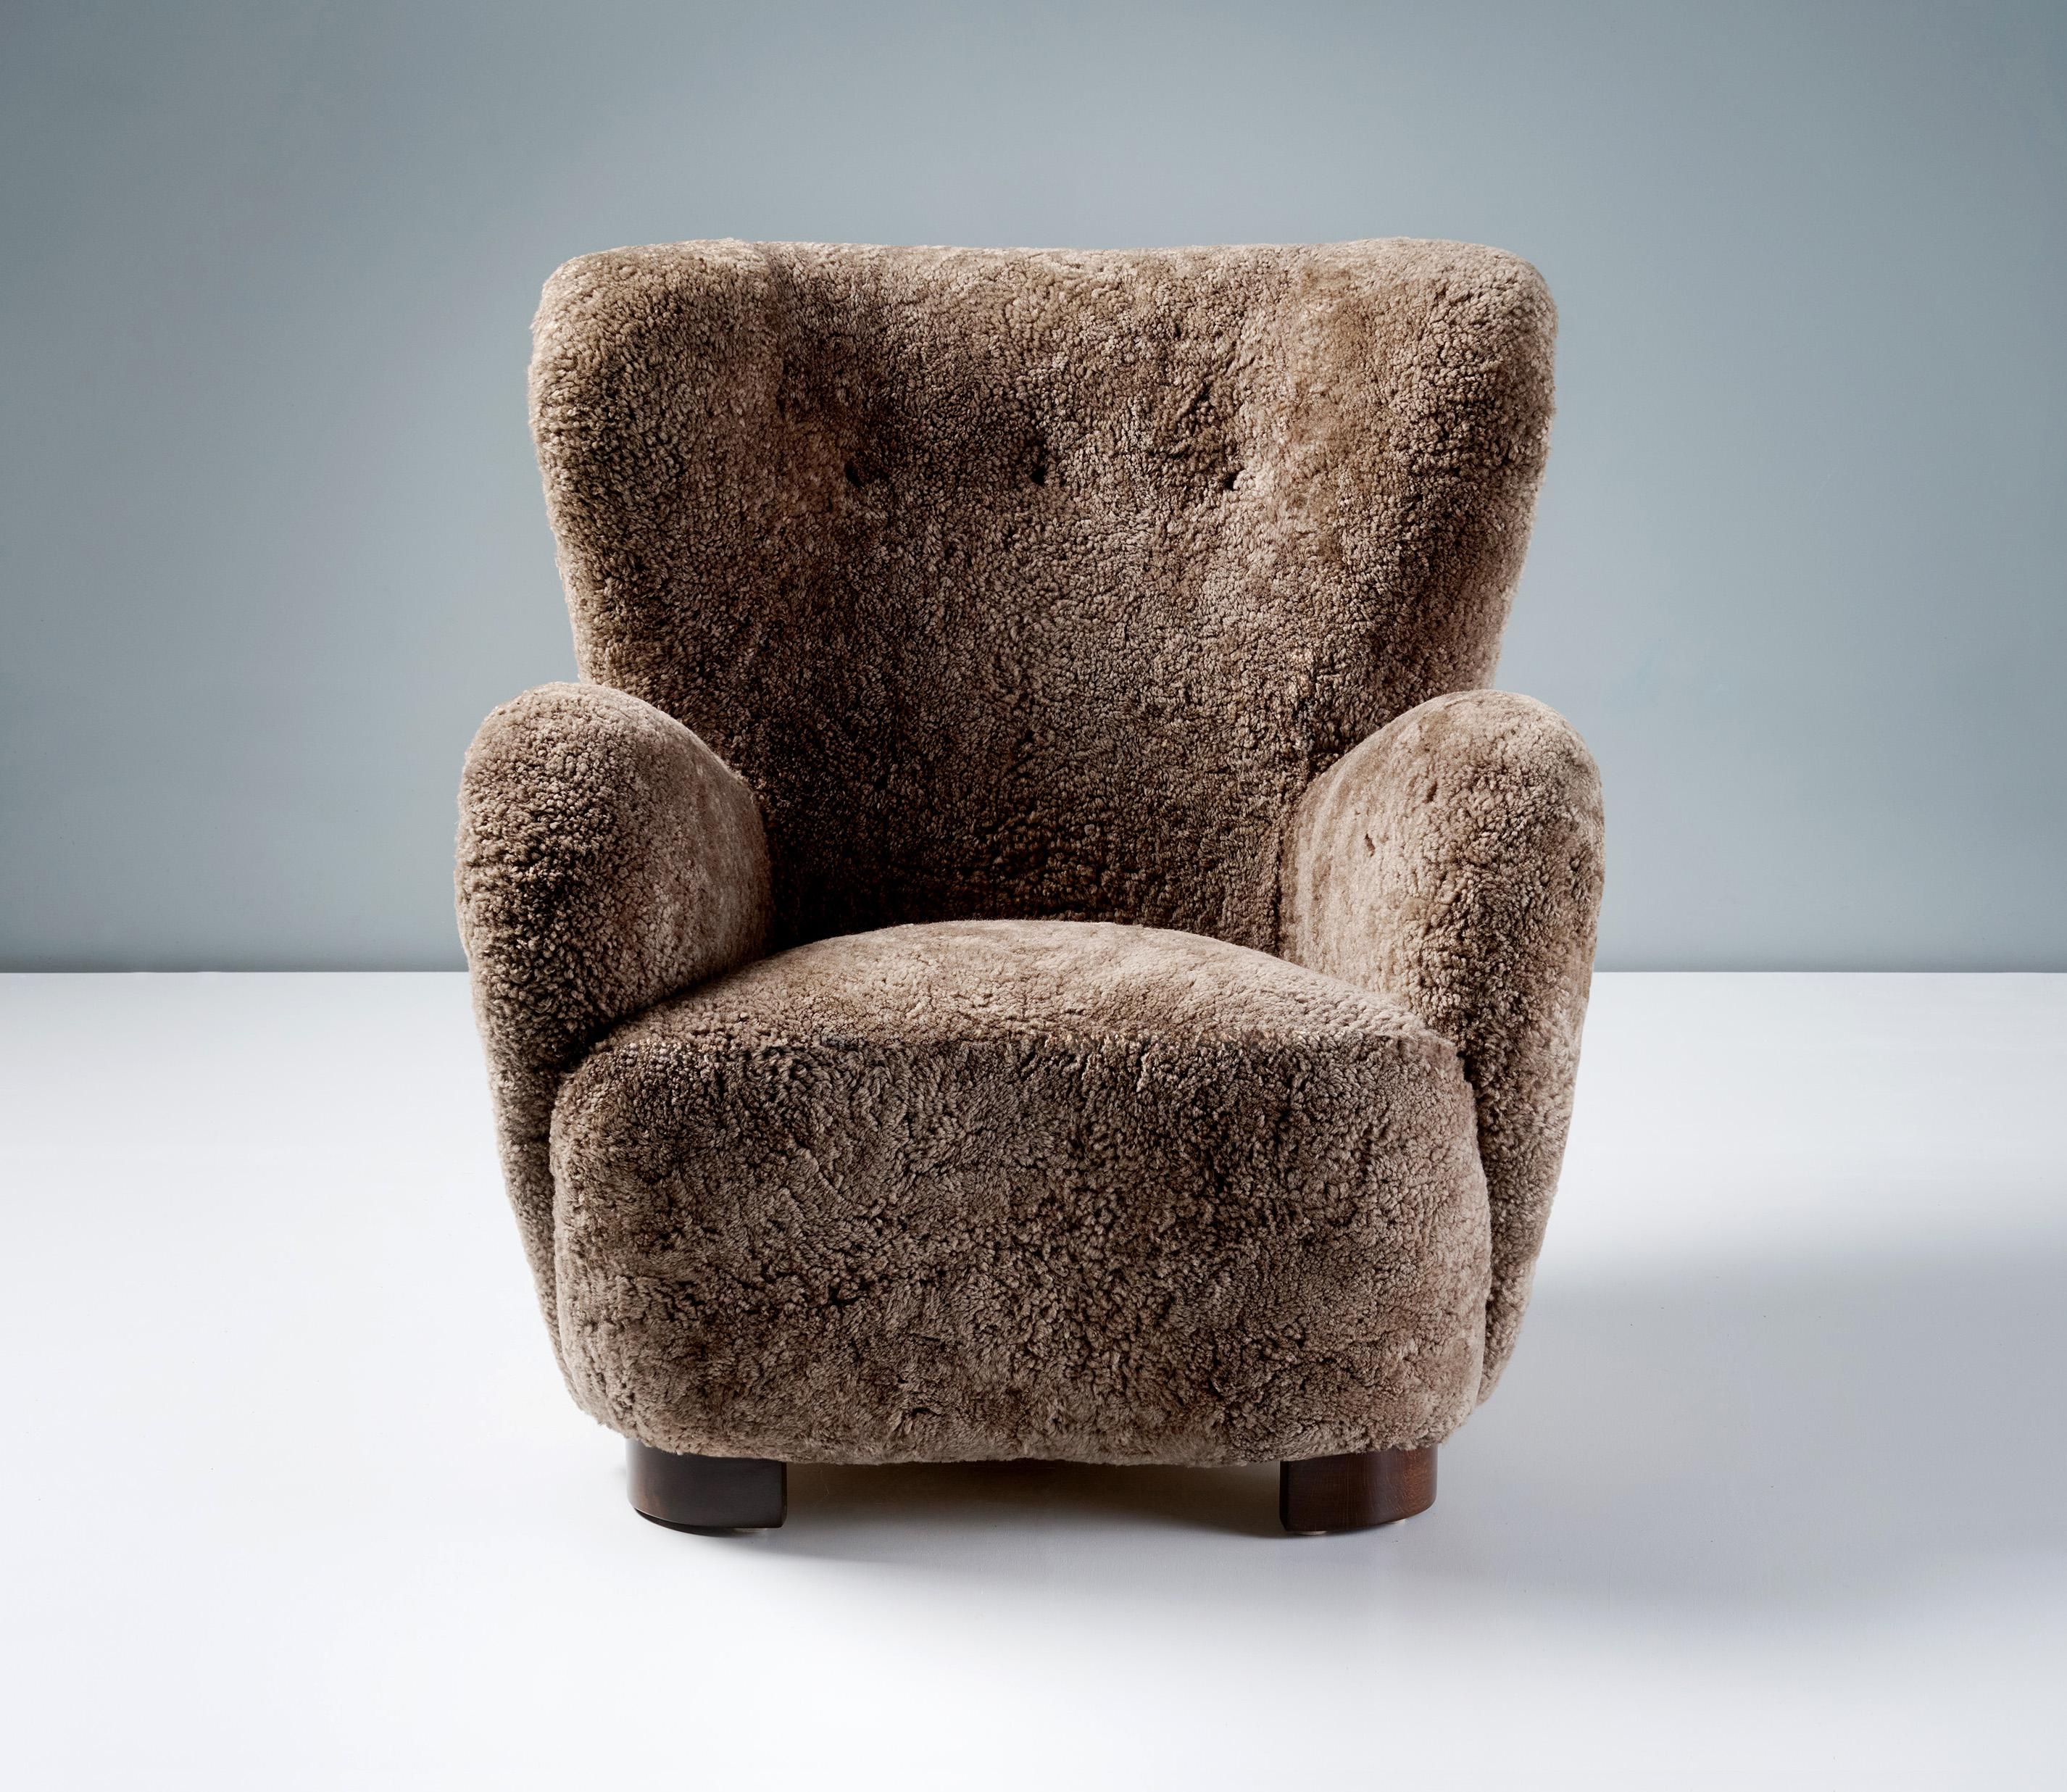 Danish Cabinetmaker Sheepskin Armchair, circa 1940s.

This large lounge chair produced by a Danish Cabinetmaker in the 1940s is typical of Danish lounge chair designs of the day. It features large, curved arms and low, wide, refinished stained beech